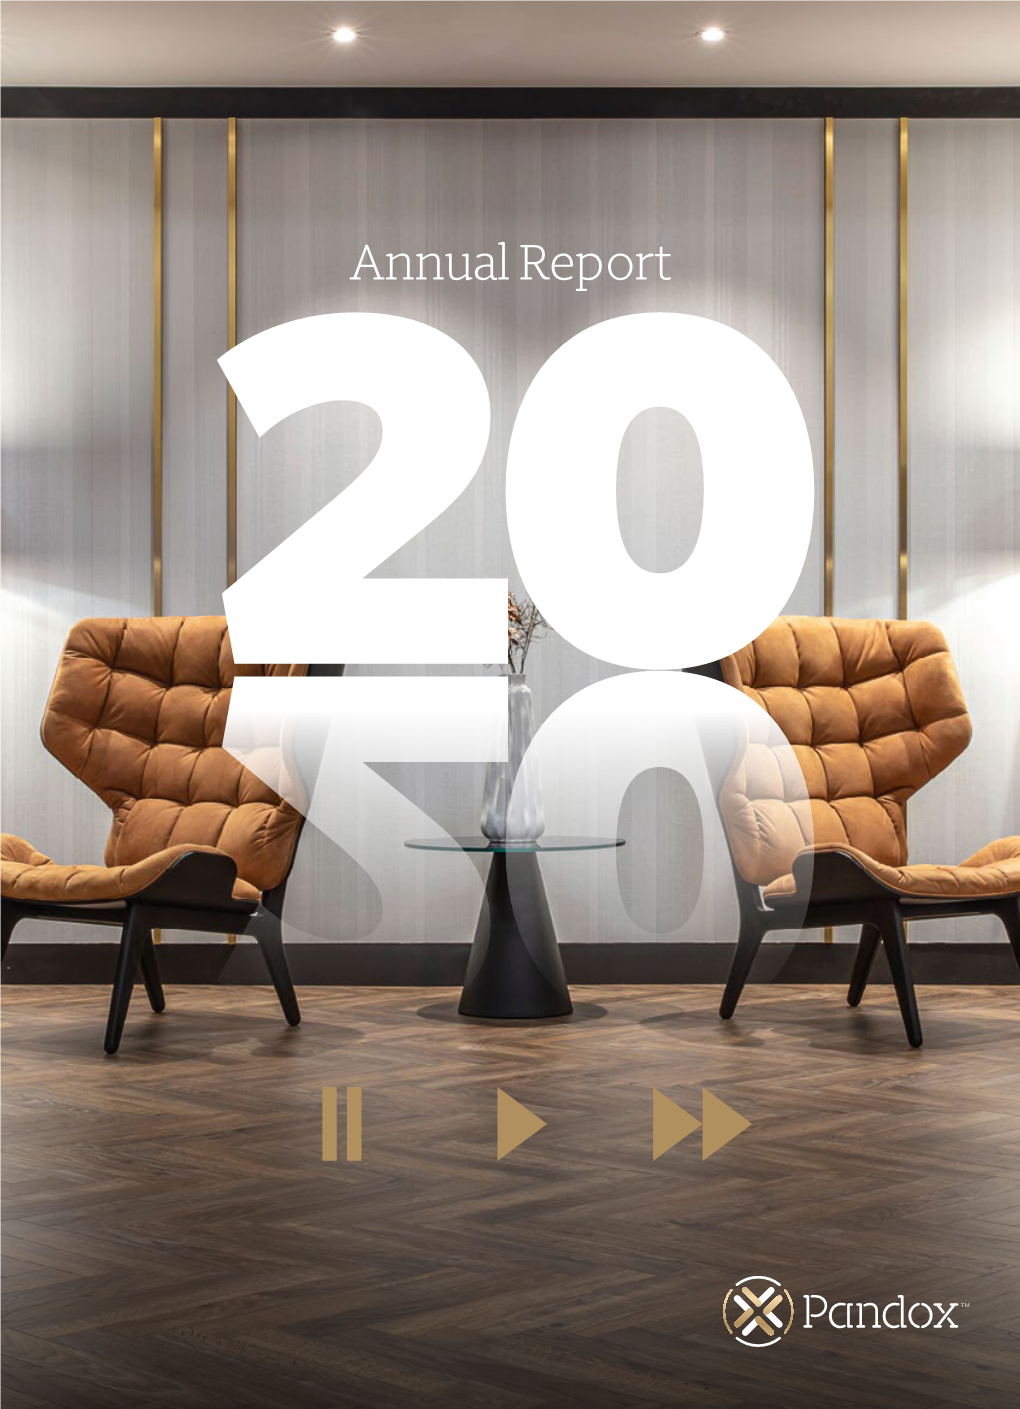 Annual Report This Is a Linked/Clickable Pdf